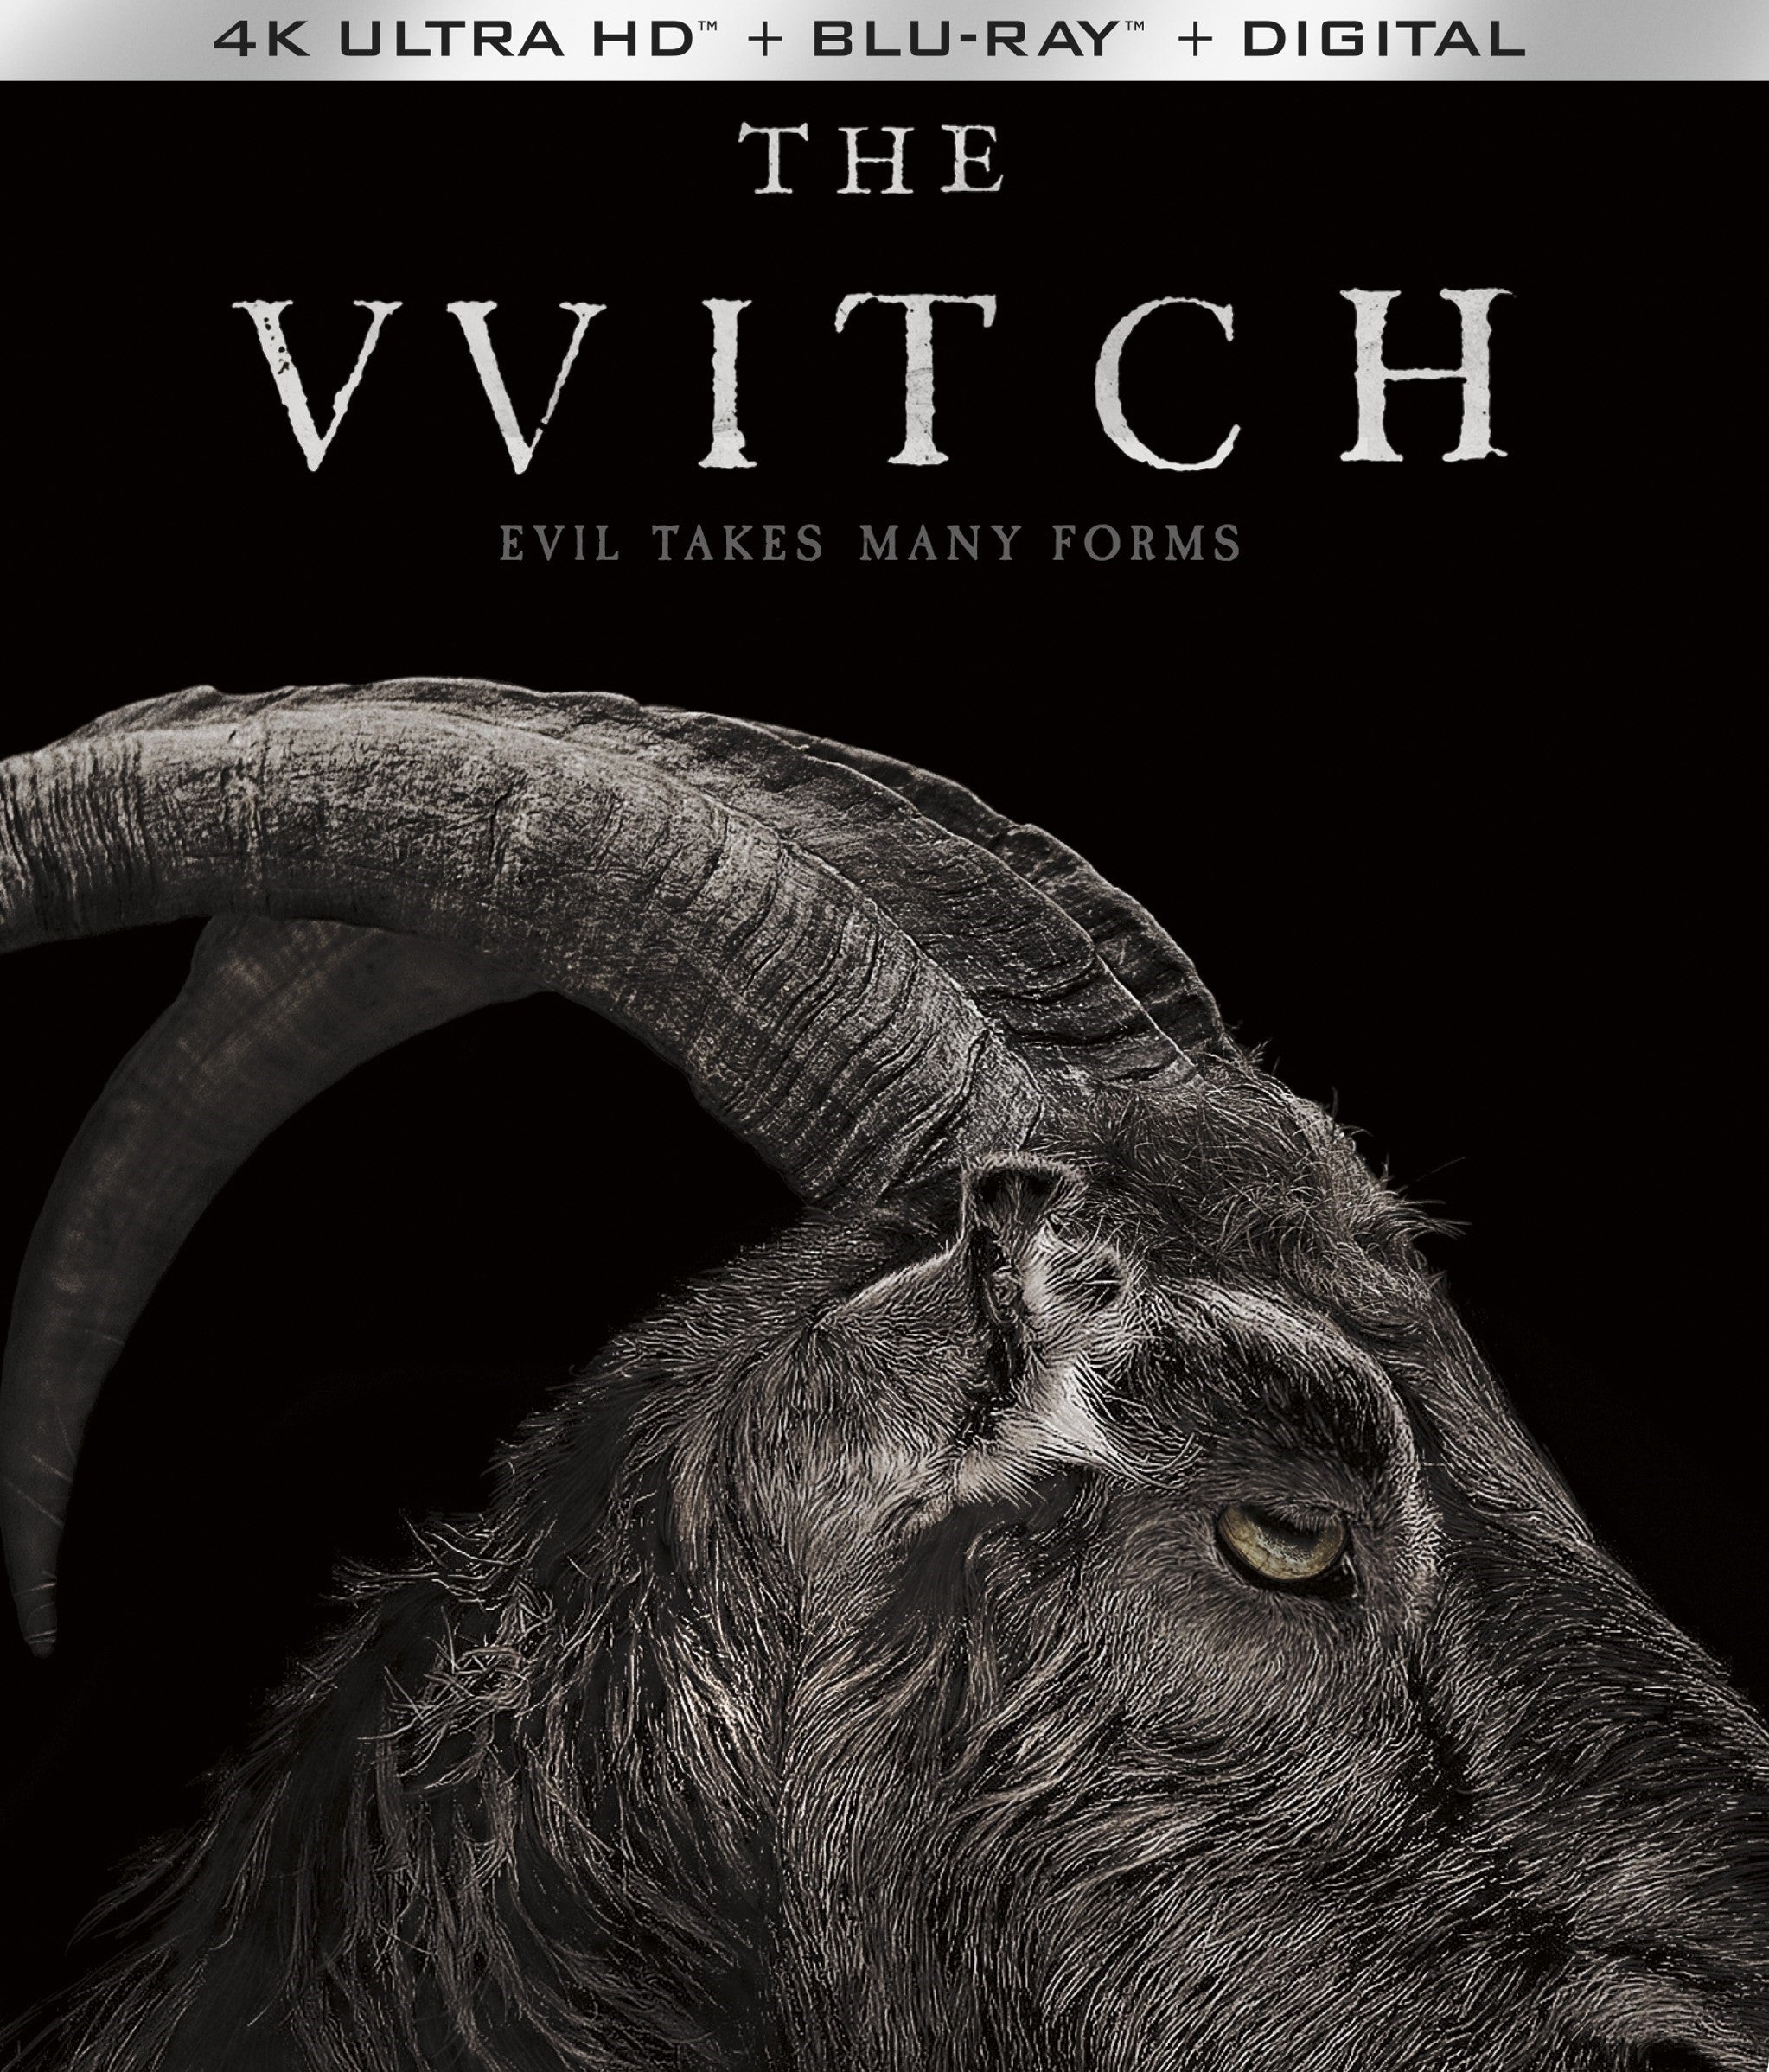 THE WITCH 4K UHD/BLU-RAY